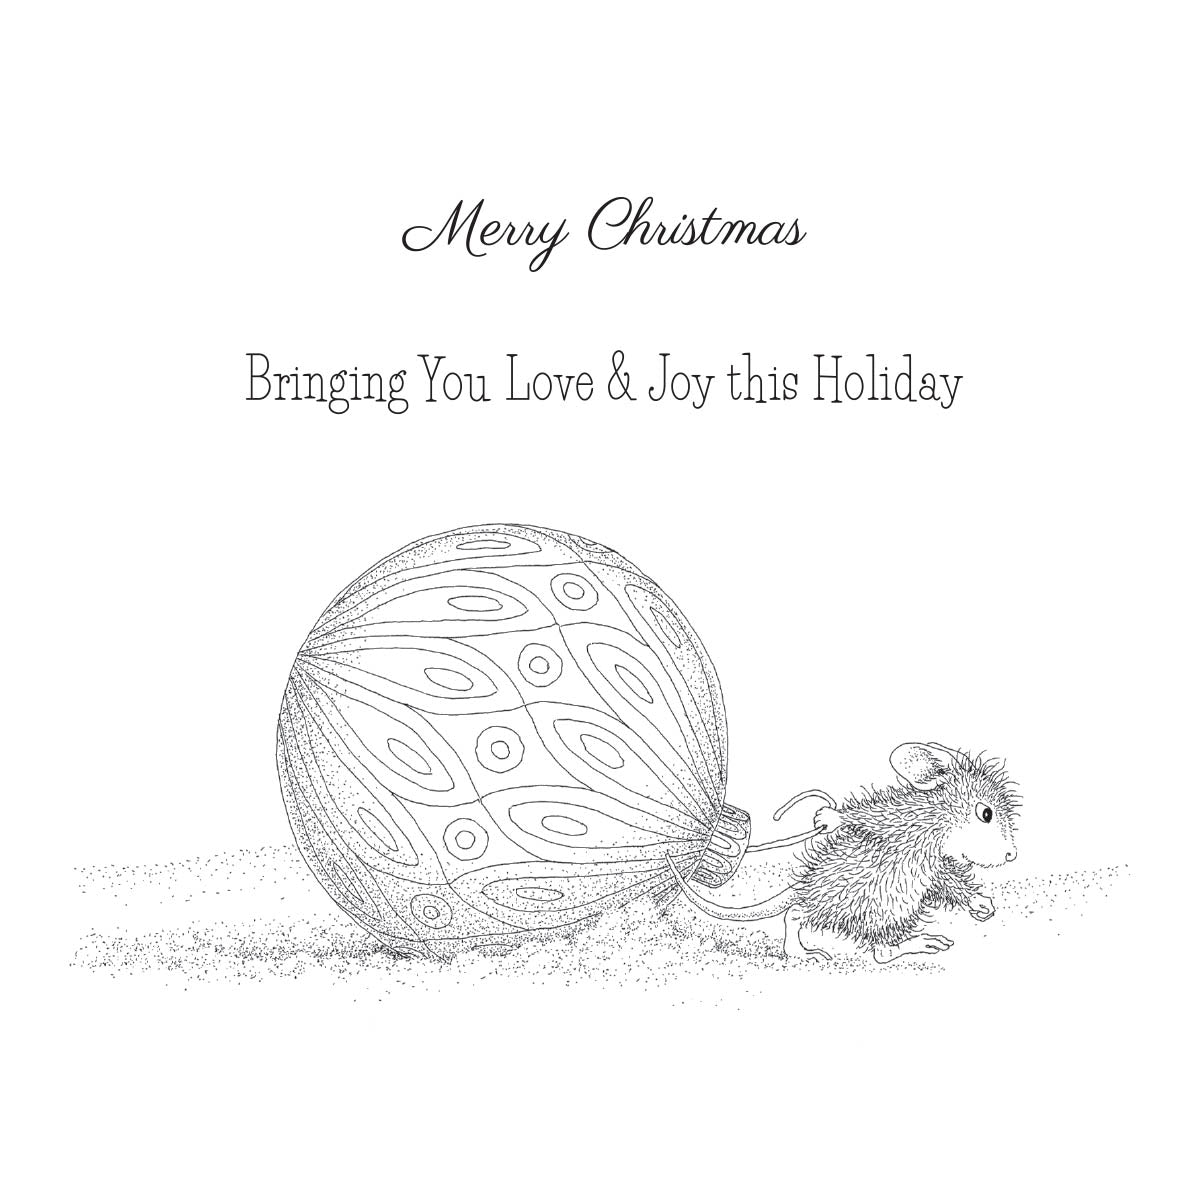 Bringing Christmas to You Cling Rubber Stamp Set from the House-Mouse Holiday Collection